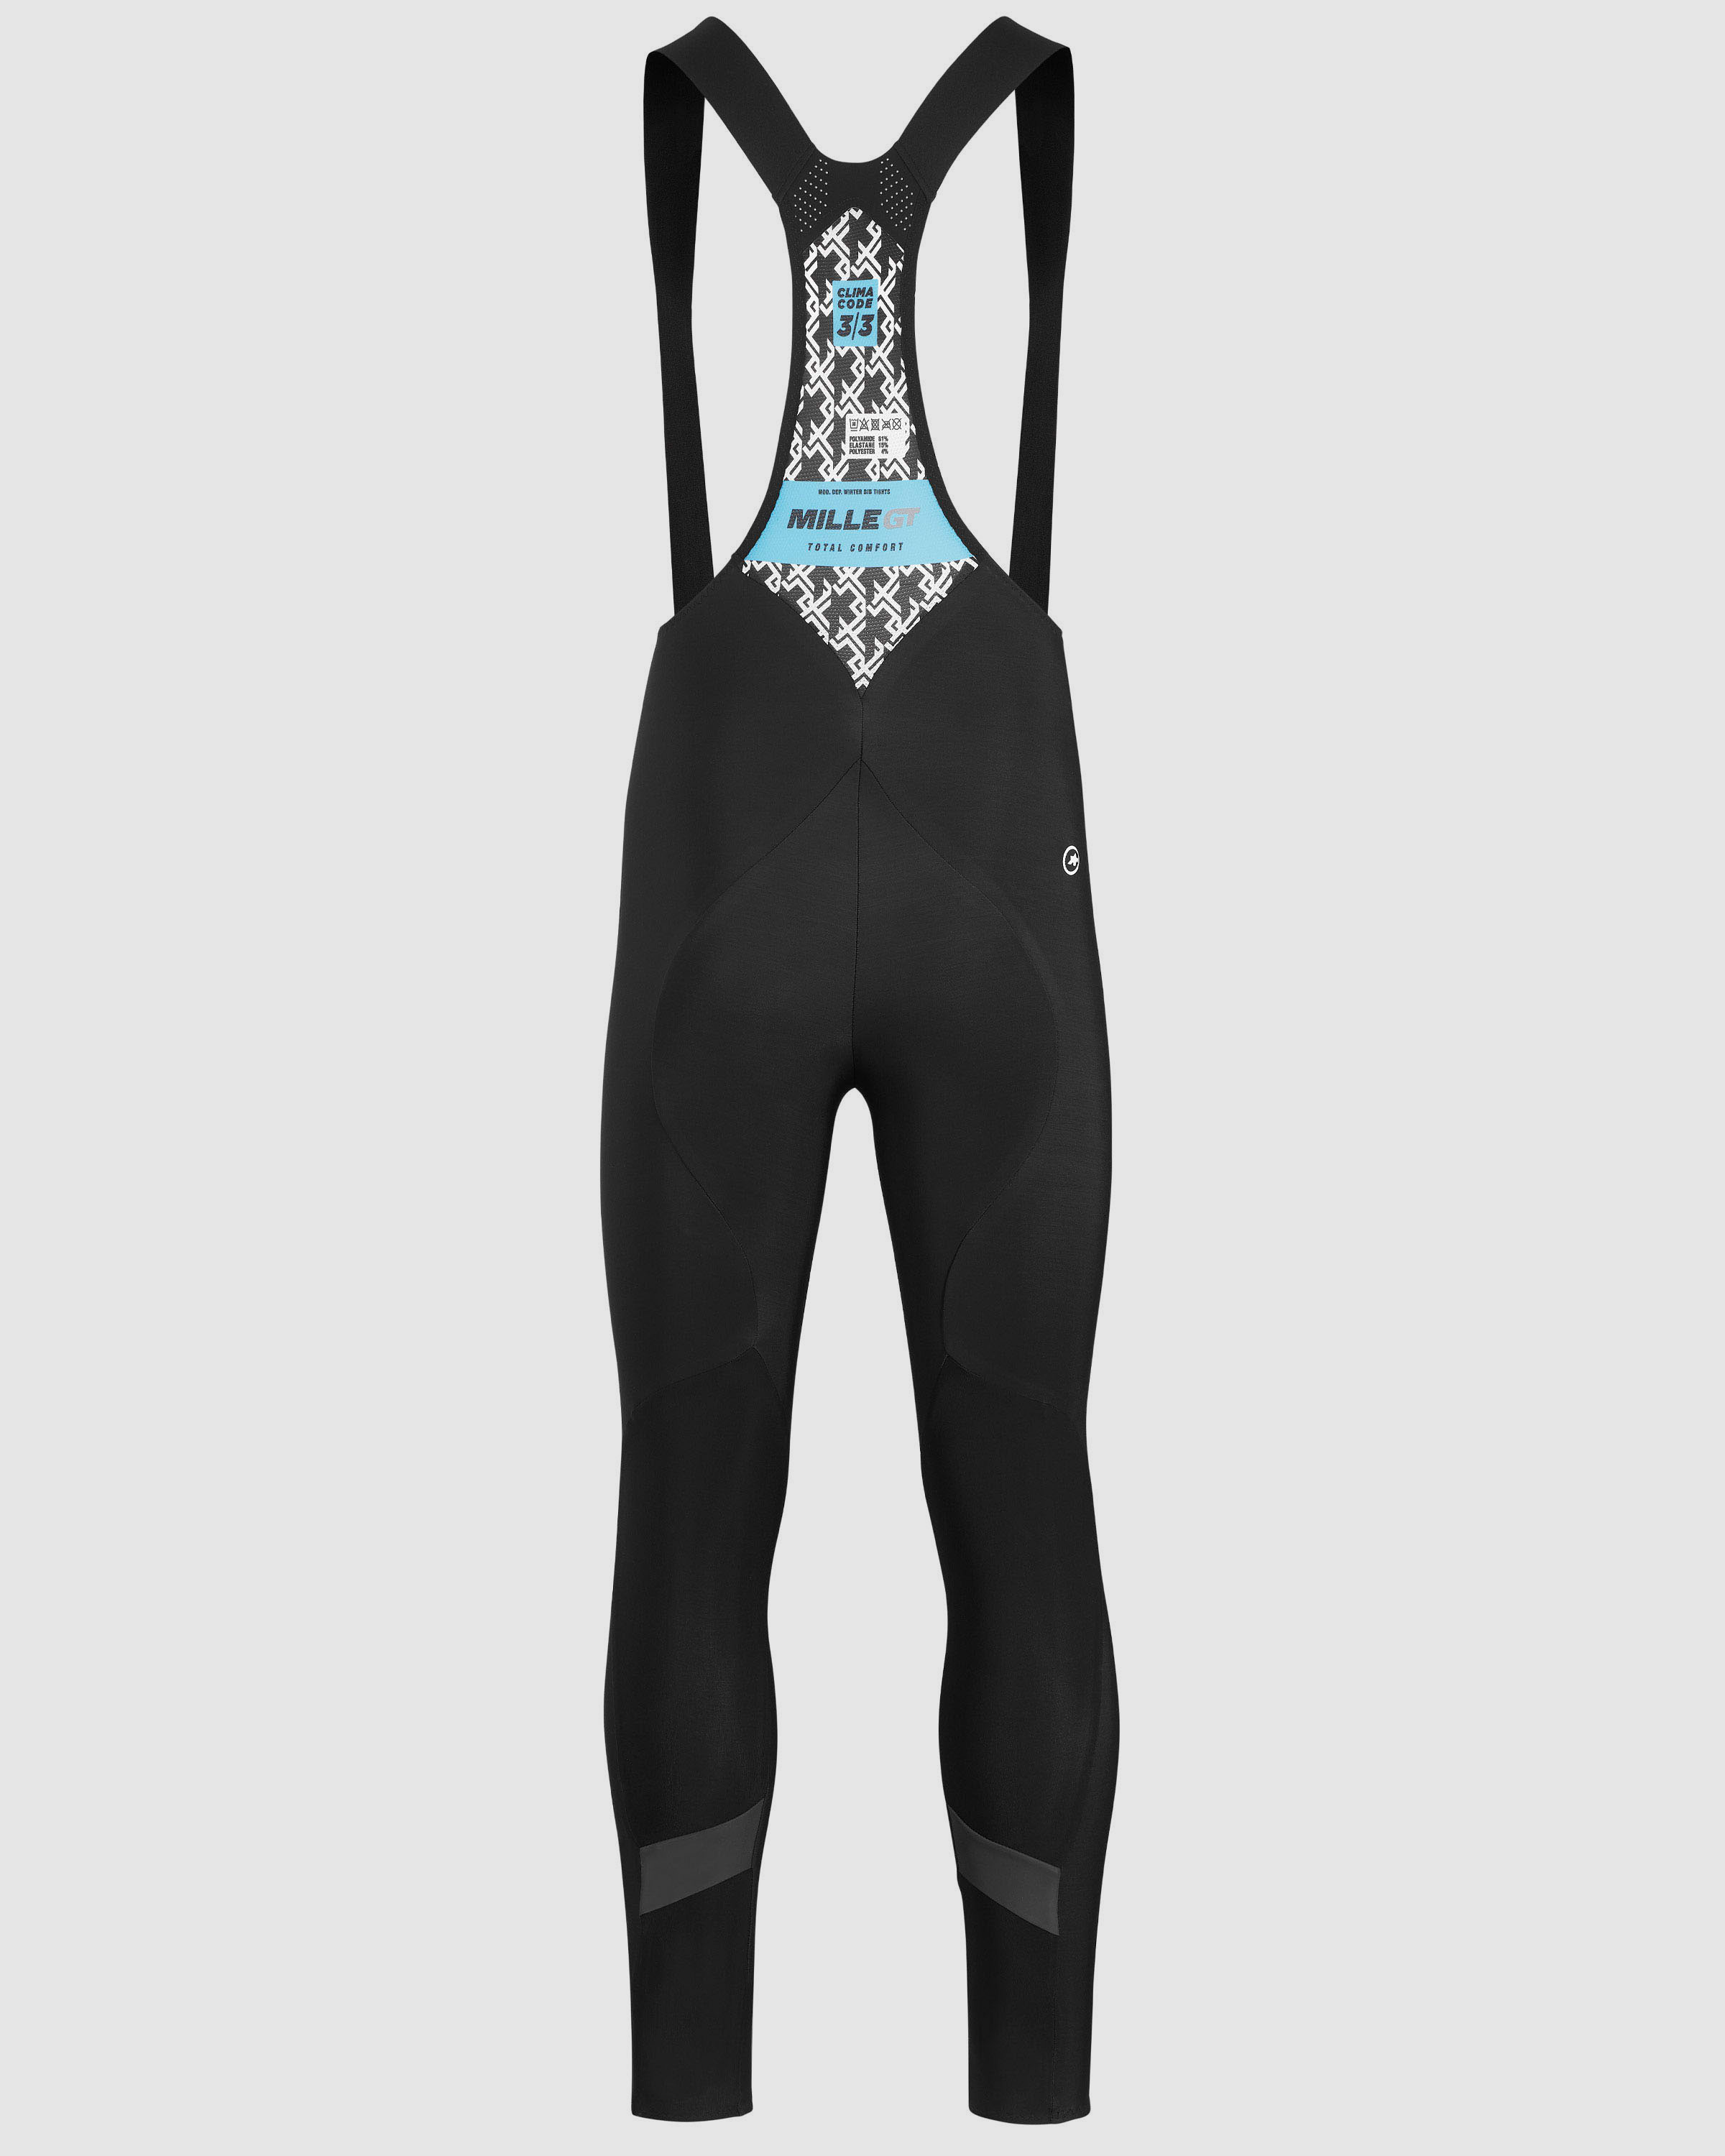 MILLE GT Winter Bib Tights no insert - ASSOS Of Switzerland - Official Outlet